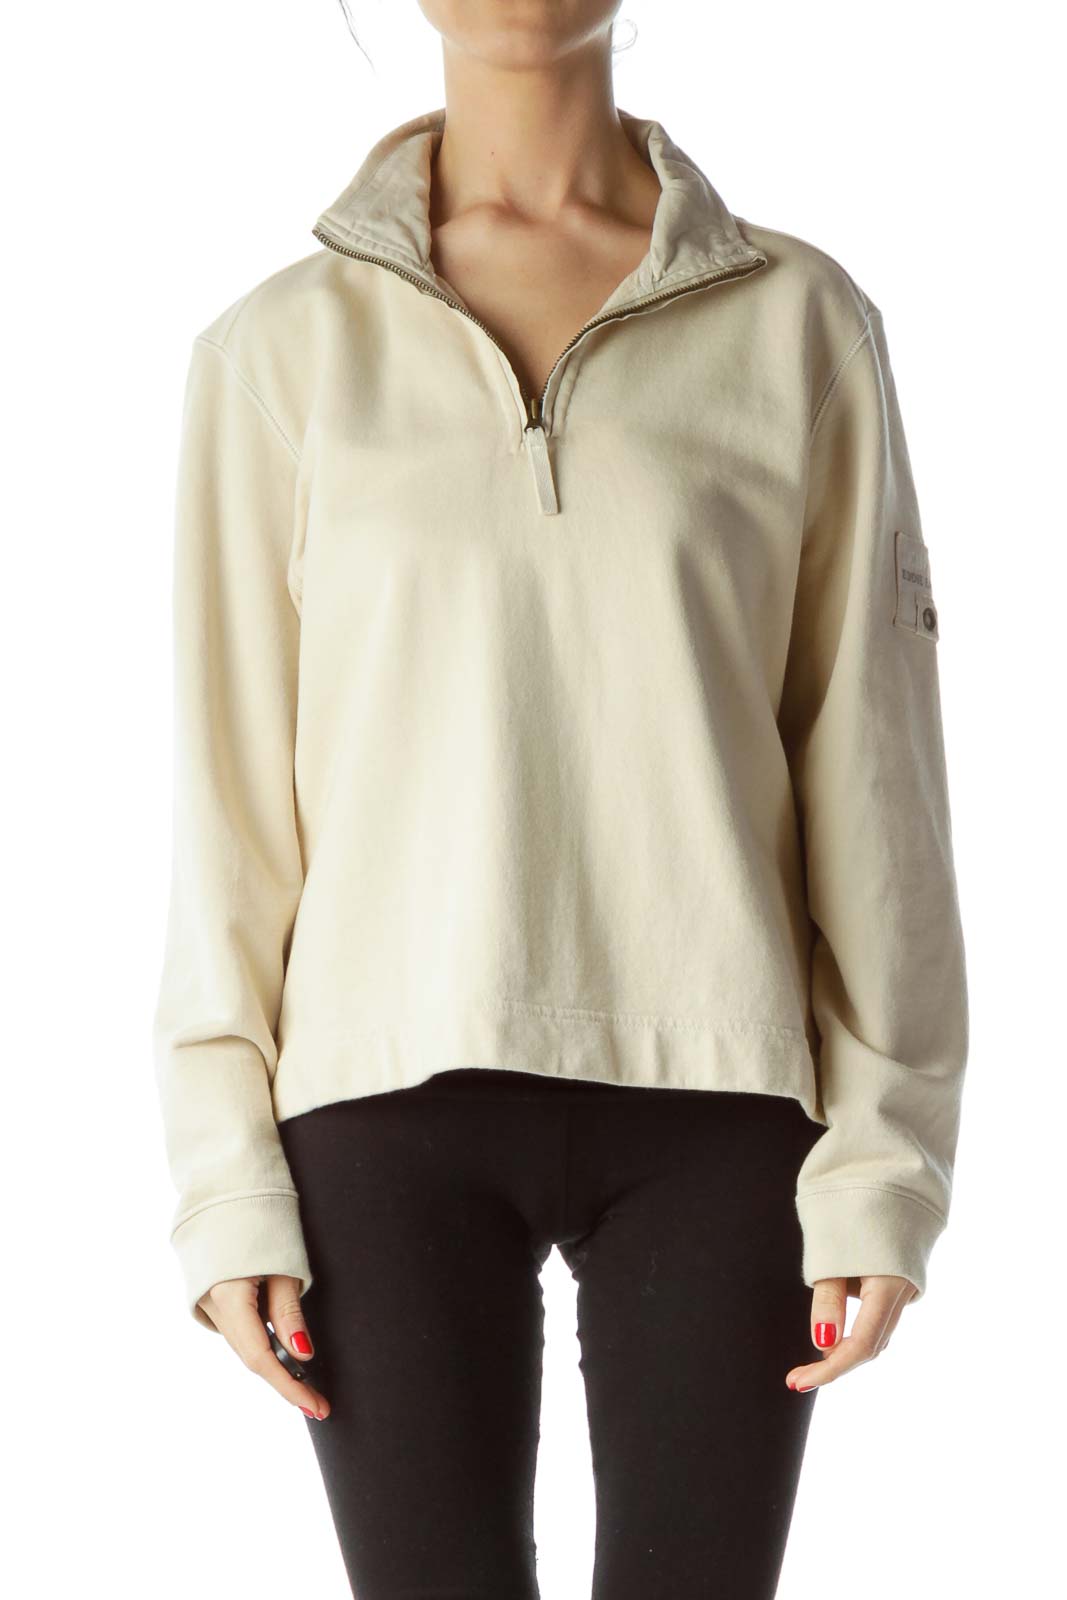 Beige Zippered Long Sleeve 100% Cotton Outdoors' Jacket Front